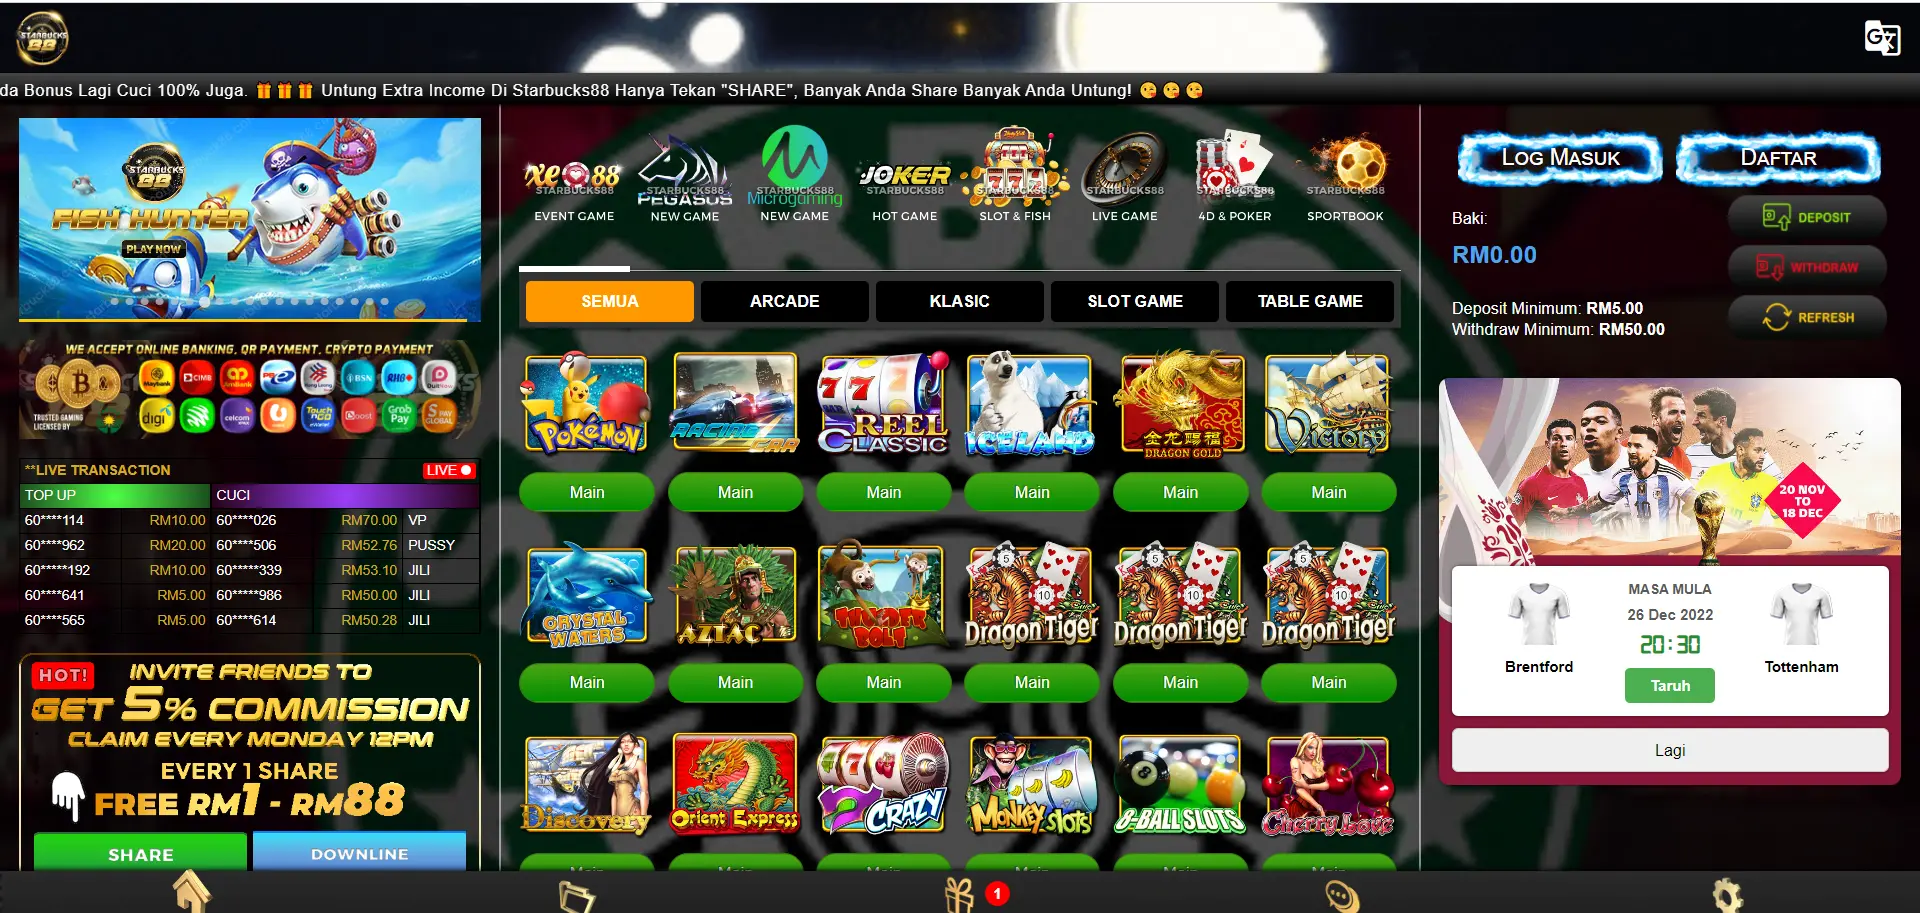 Starbuck88 Online Casino Home Page